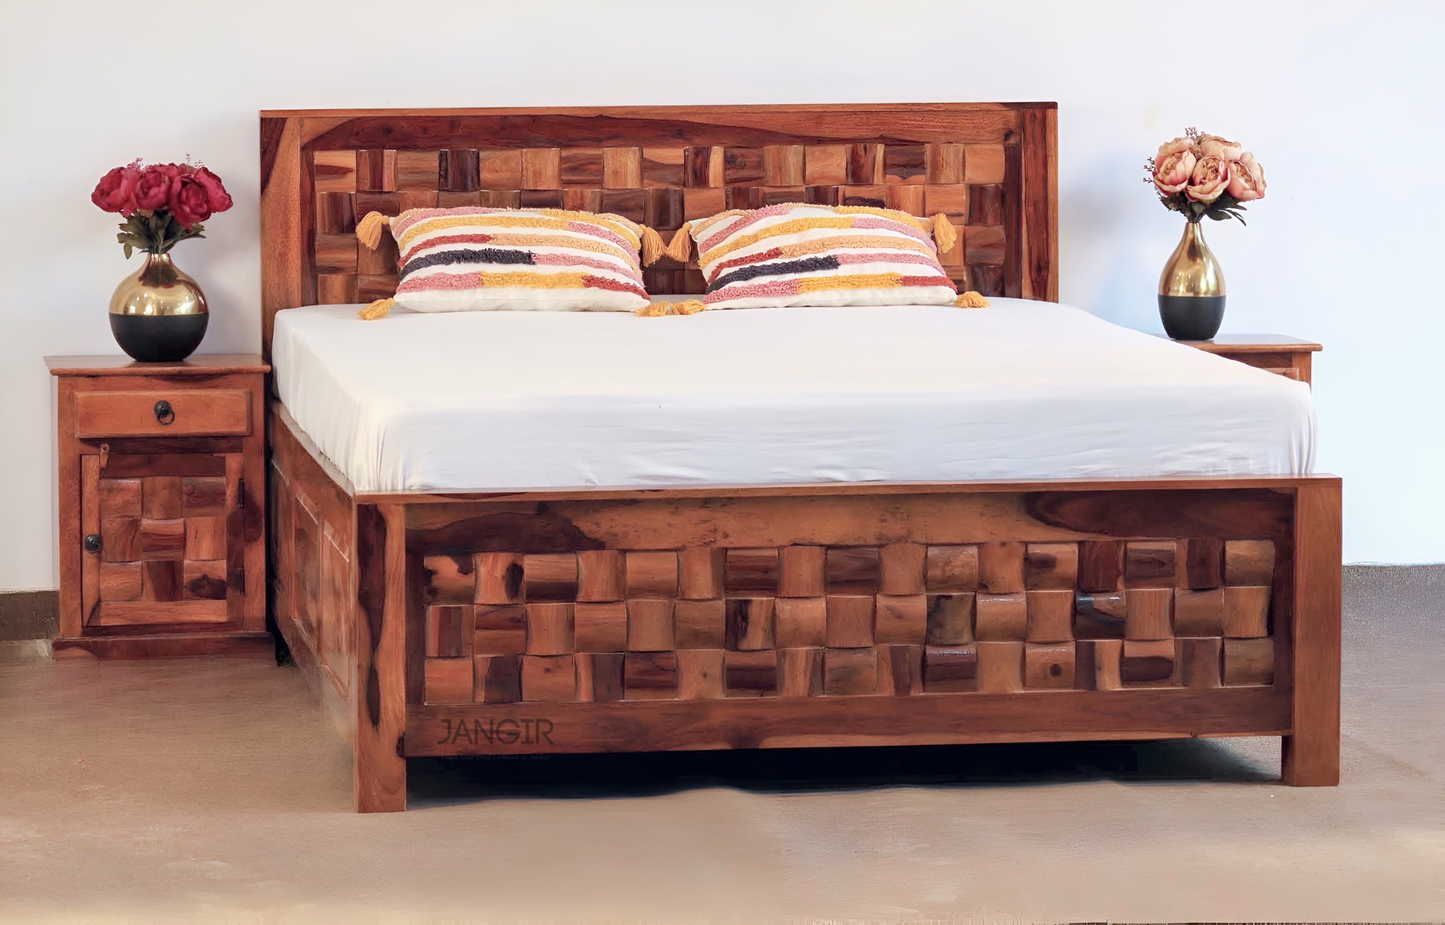 Upgrade your bedroom with our Niwar Solid Wood Storage Bed, crafted from sheesham wood. Shop King And Queen Size options of Wooden Double bed with Storage in bangalore today !